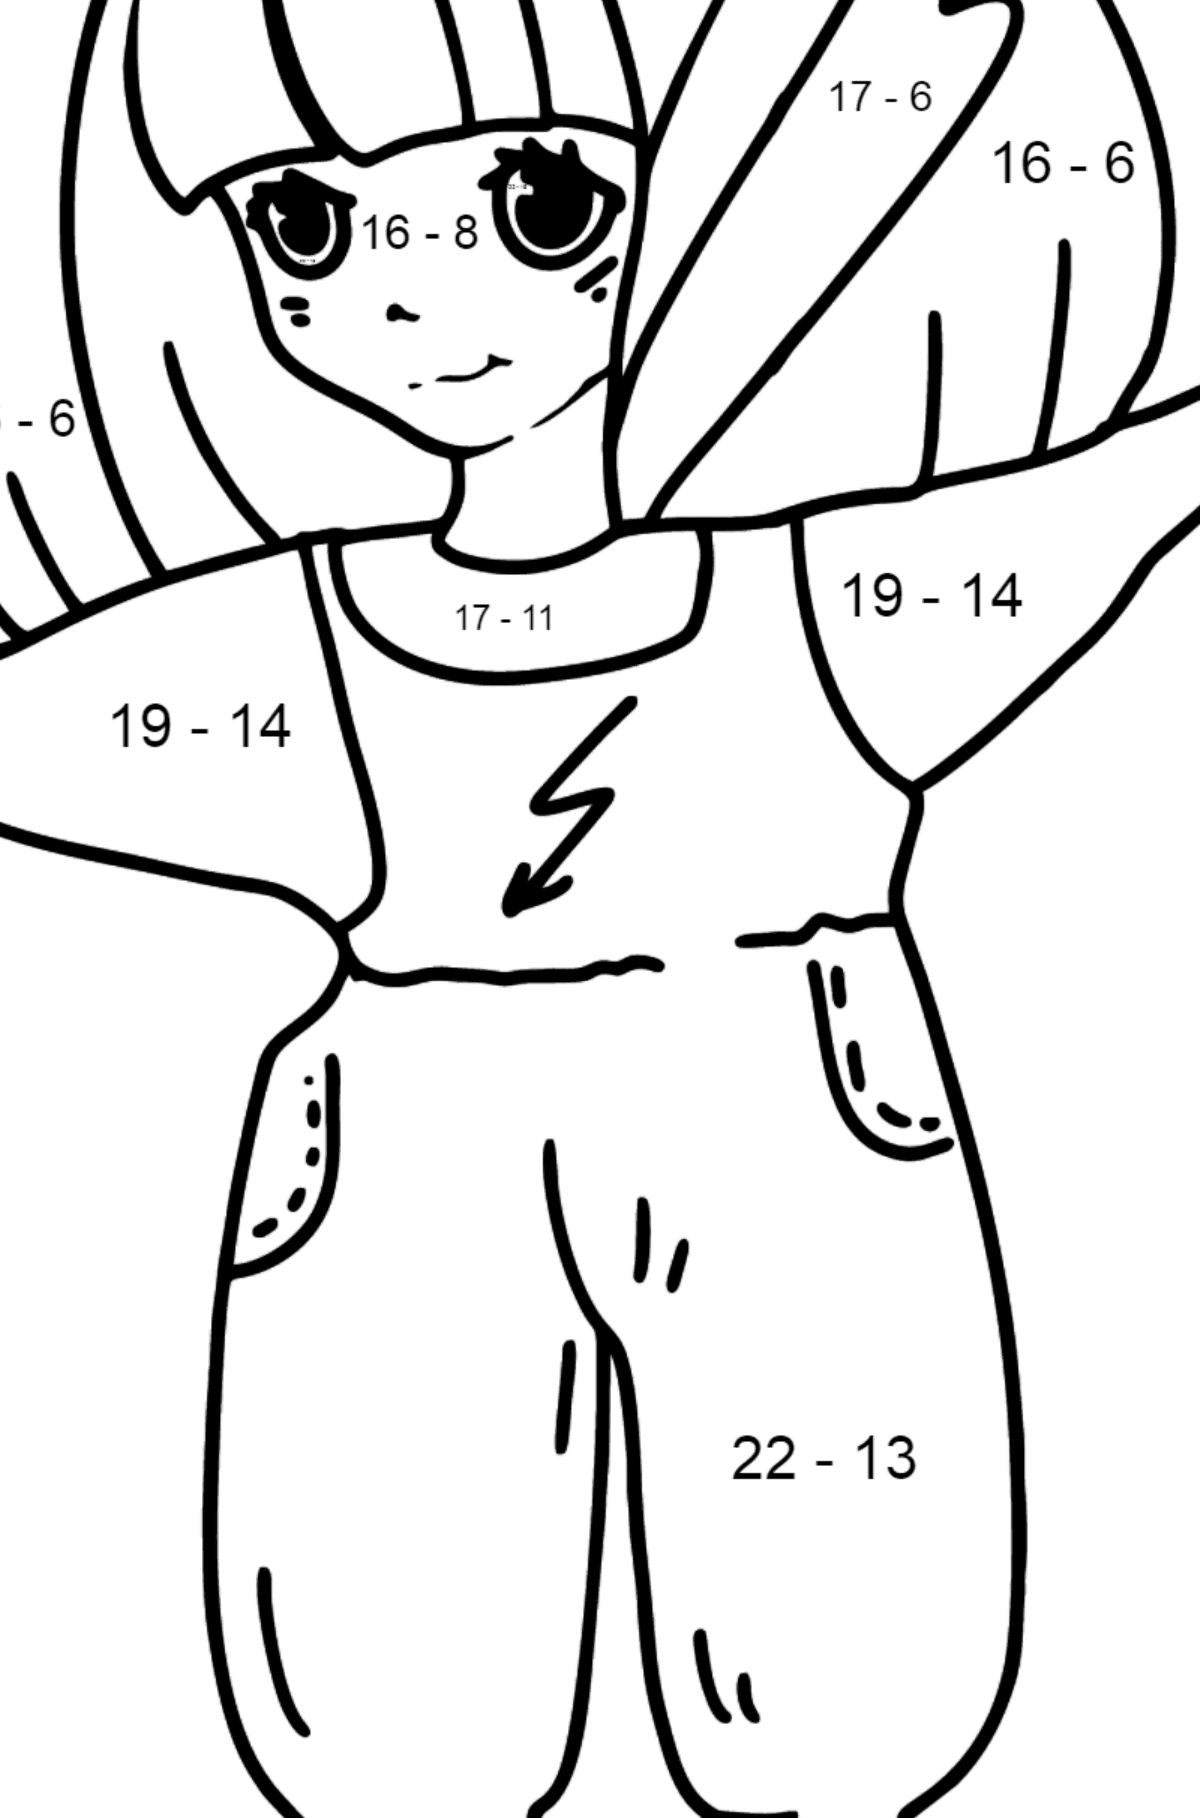 Thunder Anime Girl Coloring Pages - Math Coloring - Subtraction for Kids